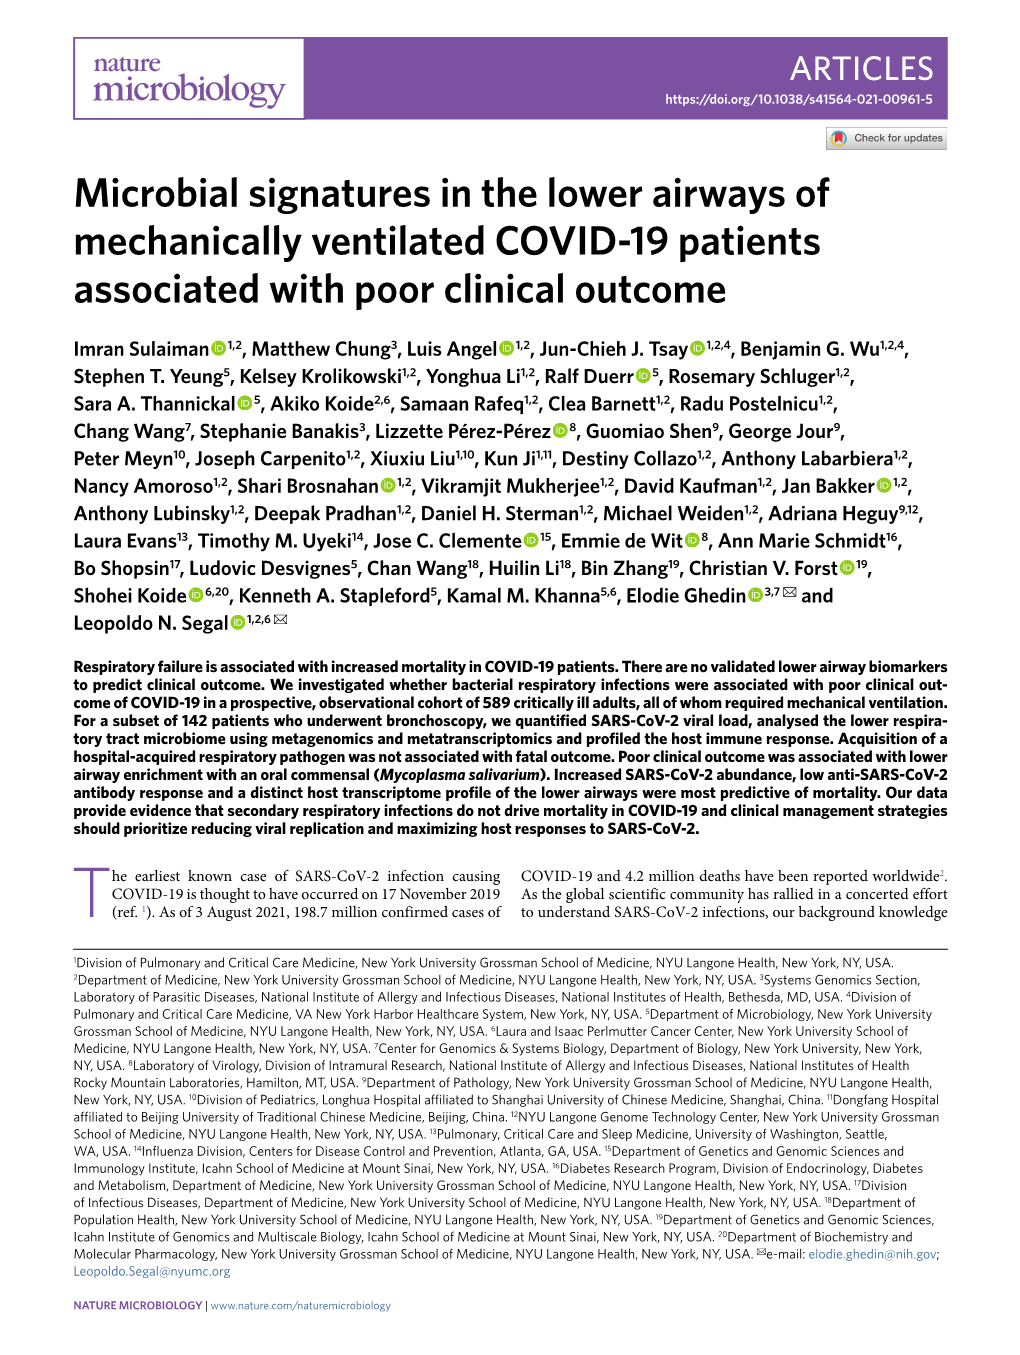 Microbial Signatures in the Lower Airways of Mechanically Ventilated COVID-19 Patients Associated with Poor Clinical Outcome